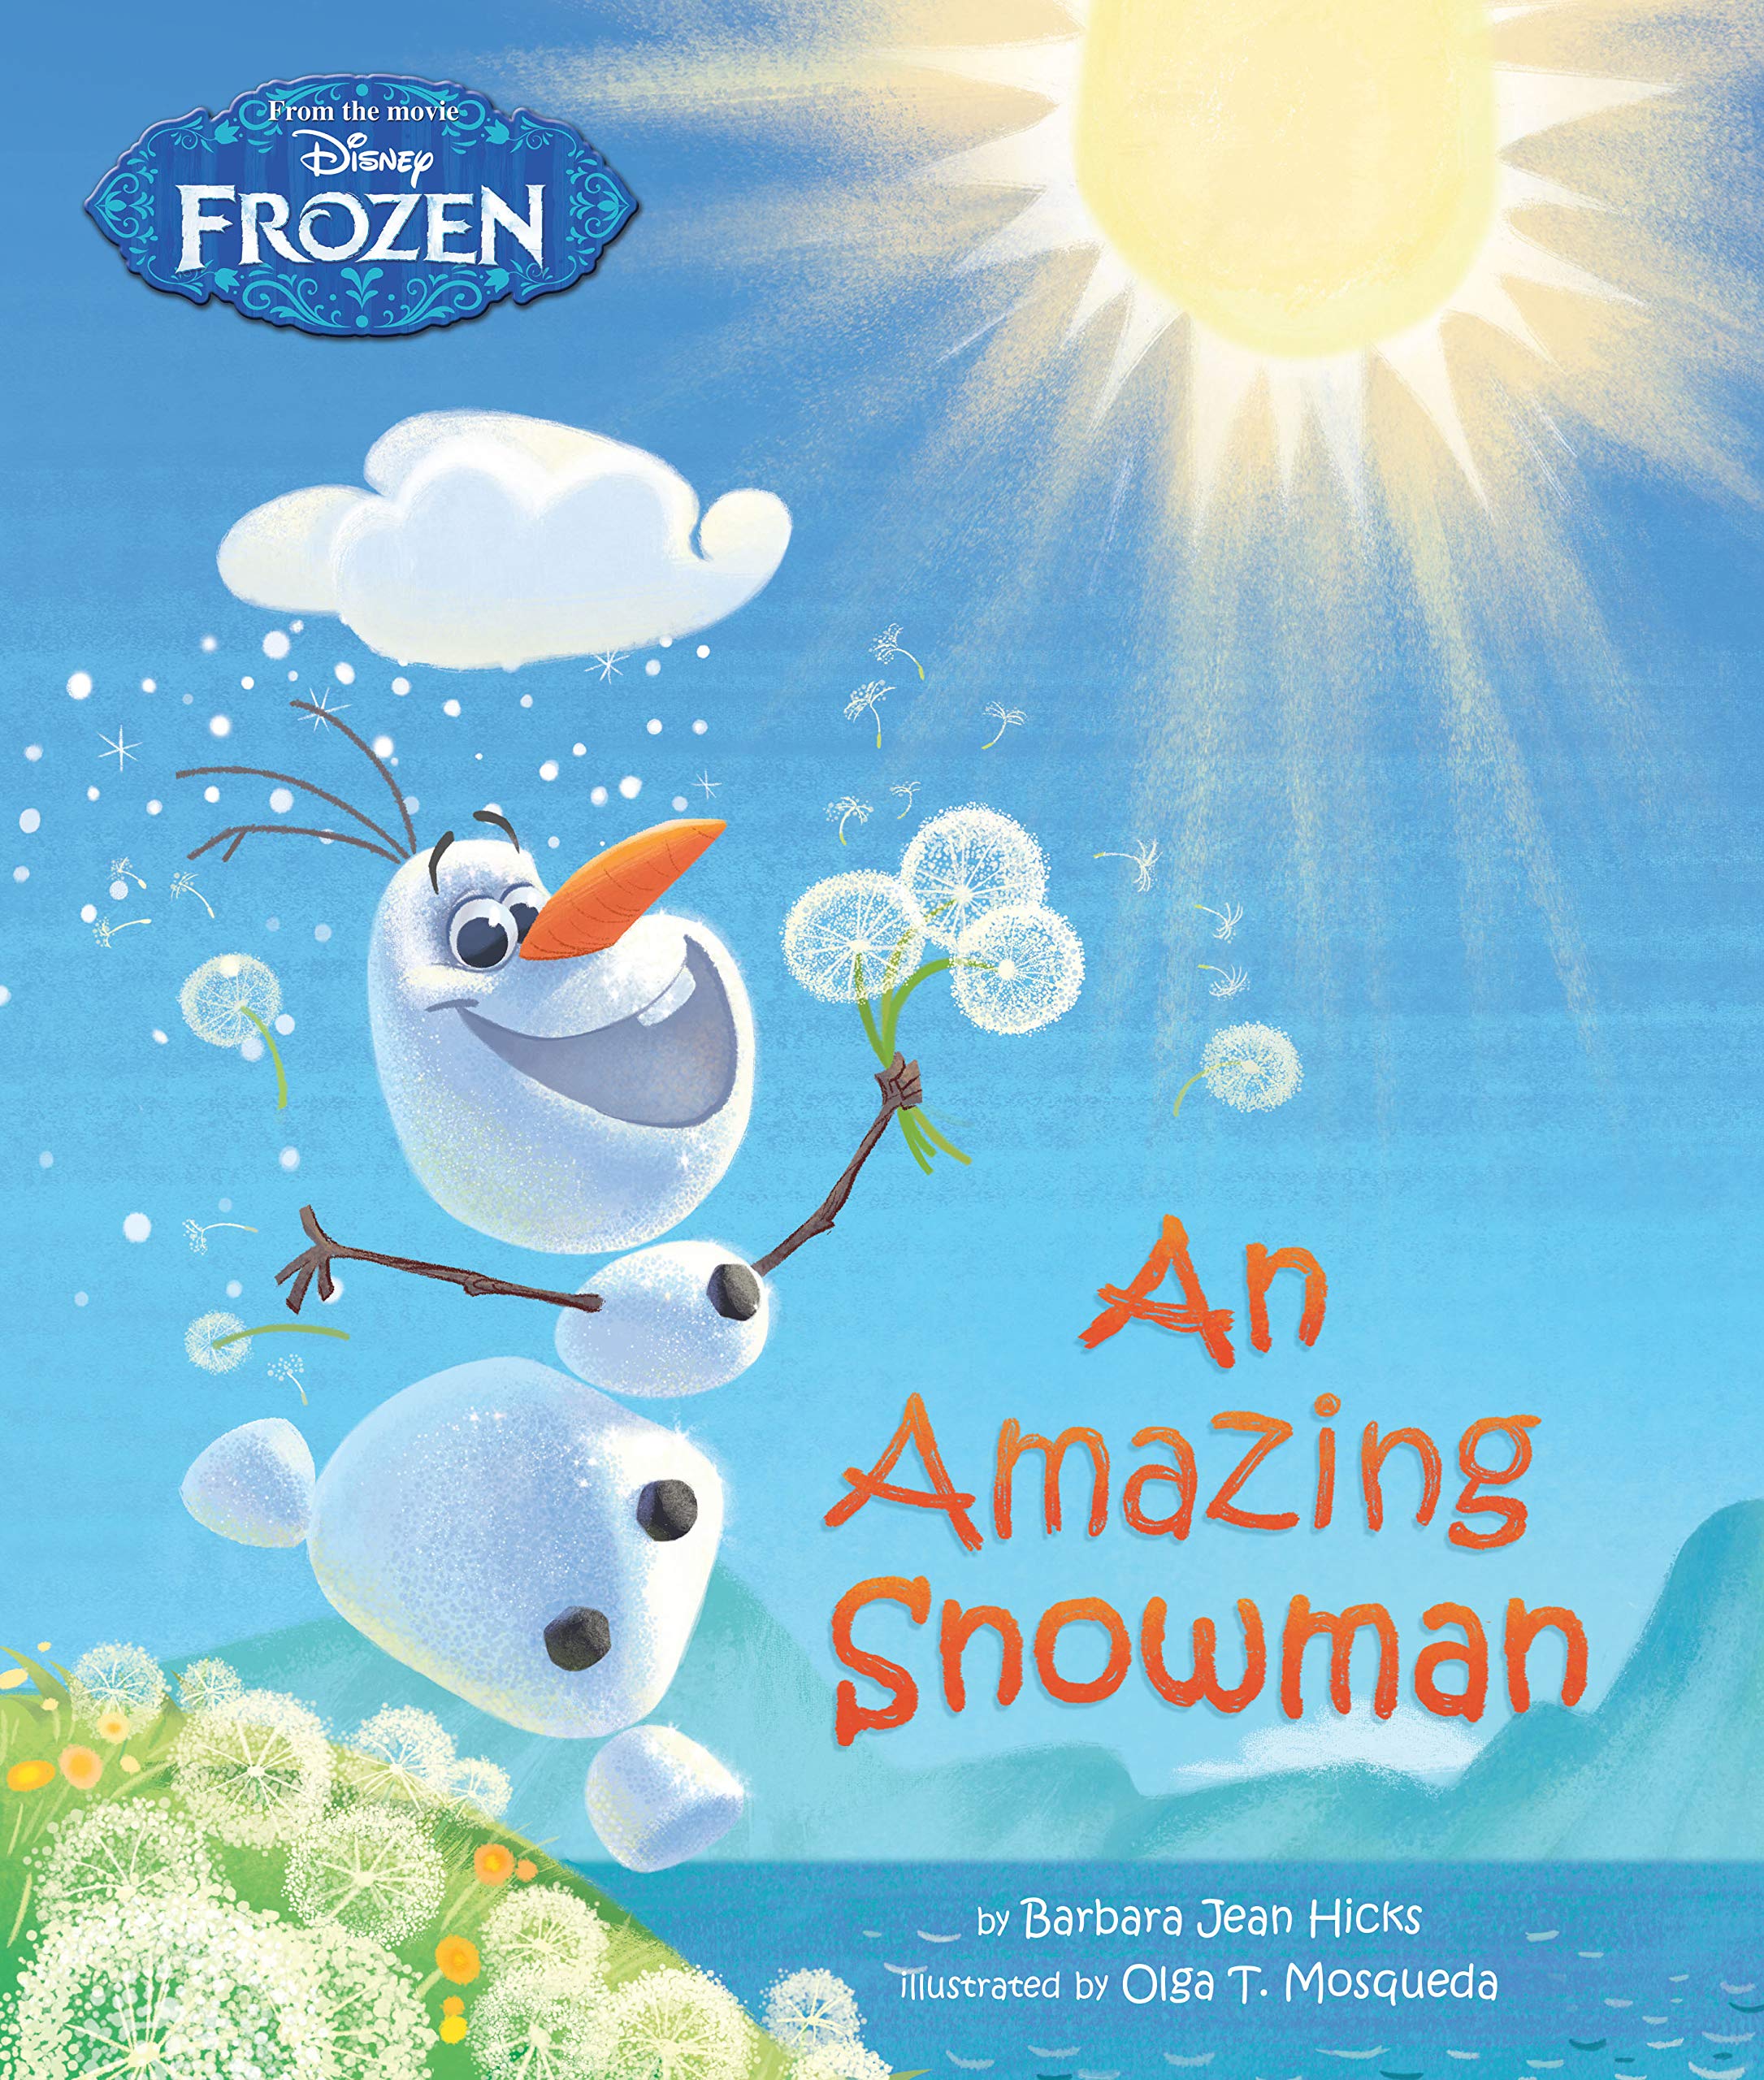 Disney Frozen Sisters Anniversary Olaf Snowman Christmas Gift